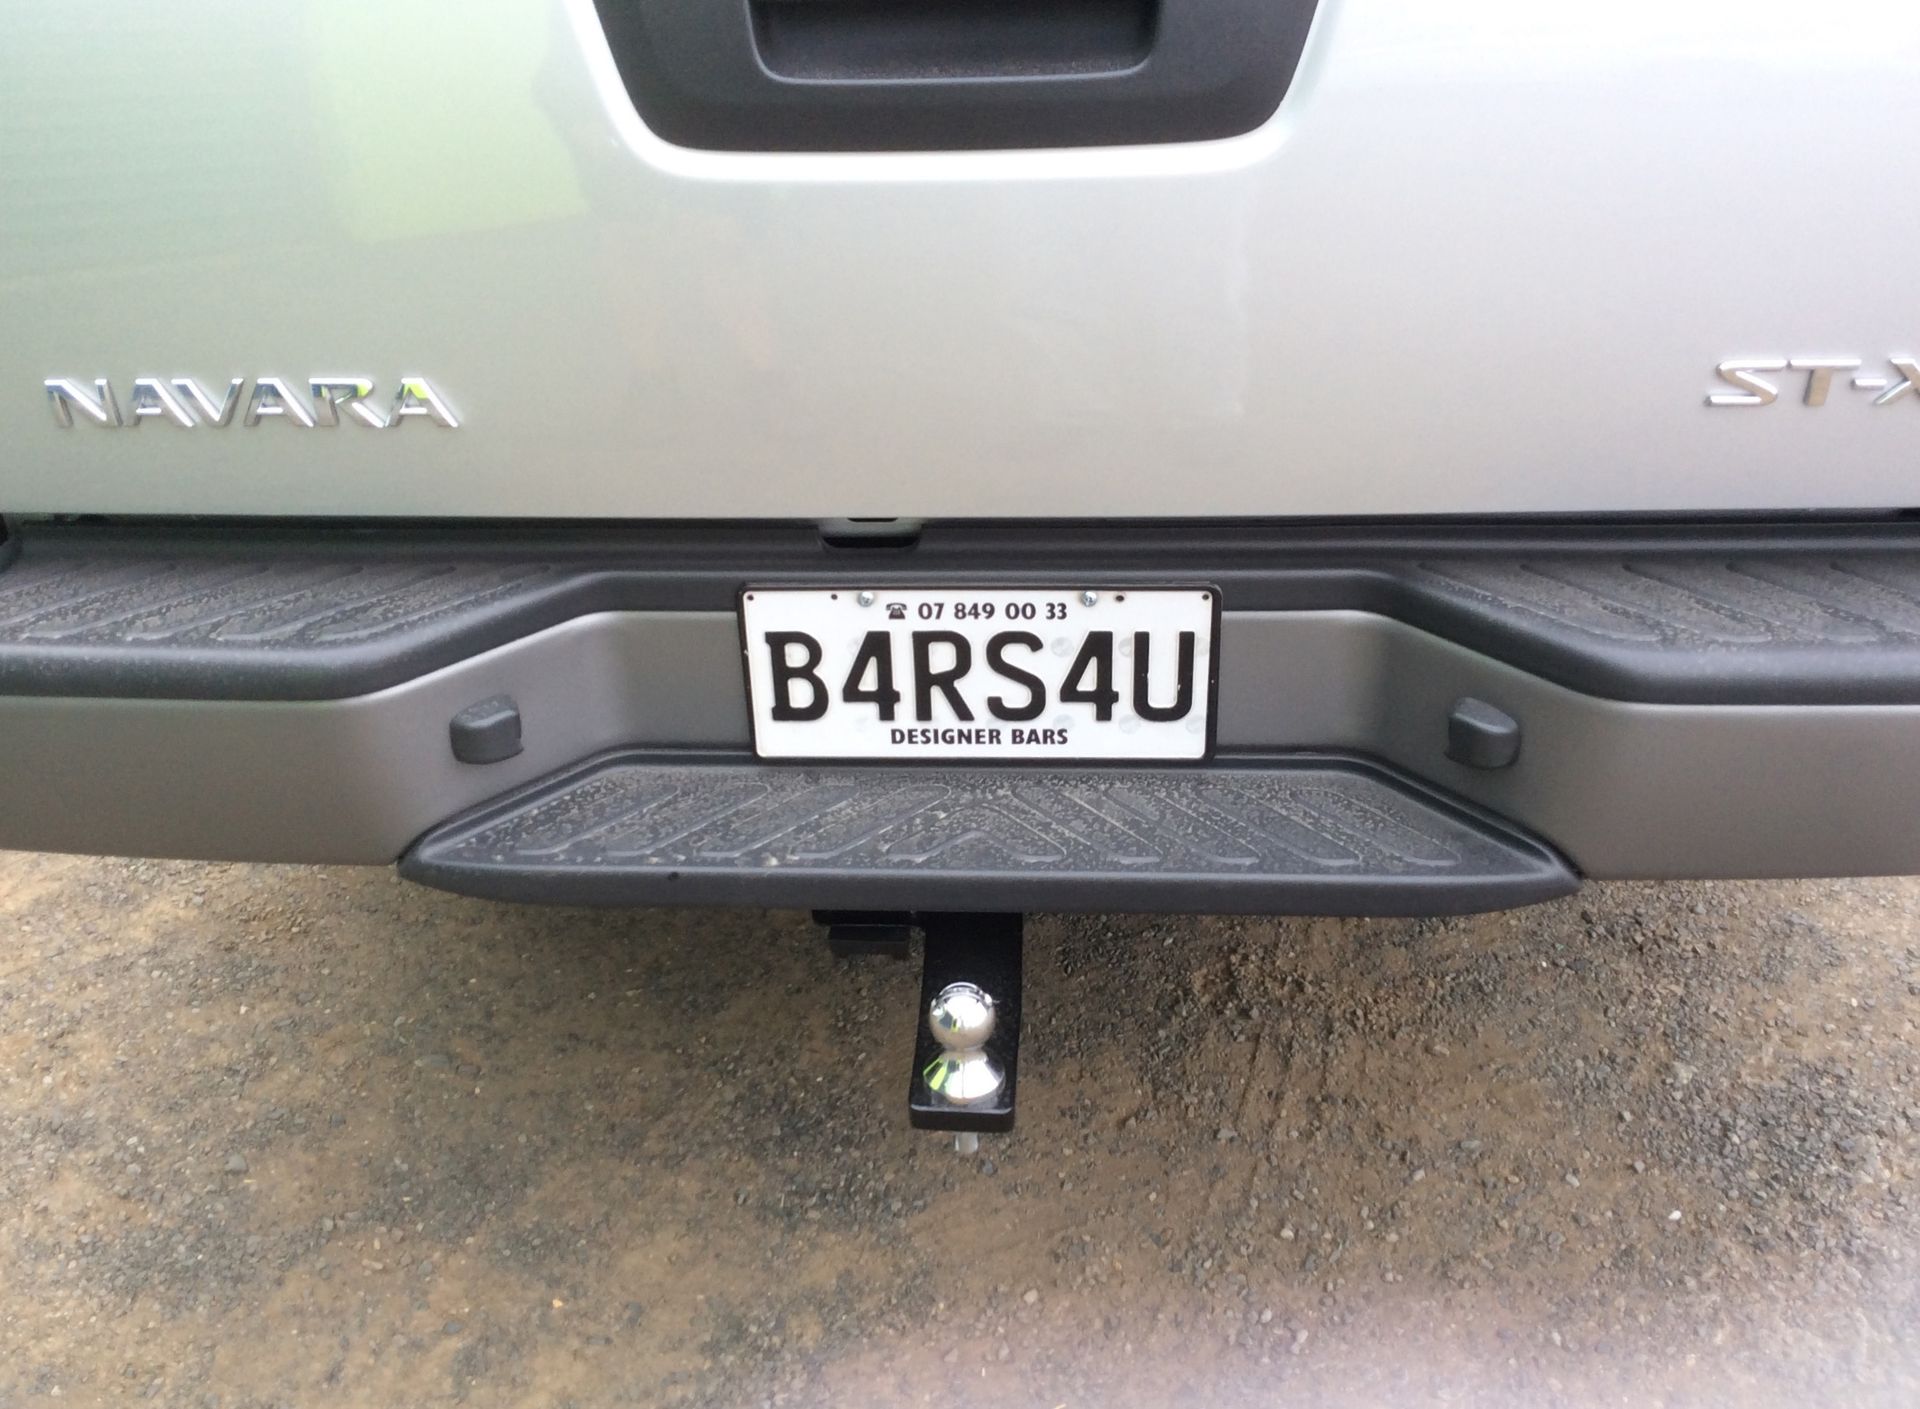 Fantastic tow bars in New Zealand